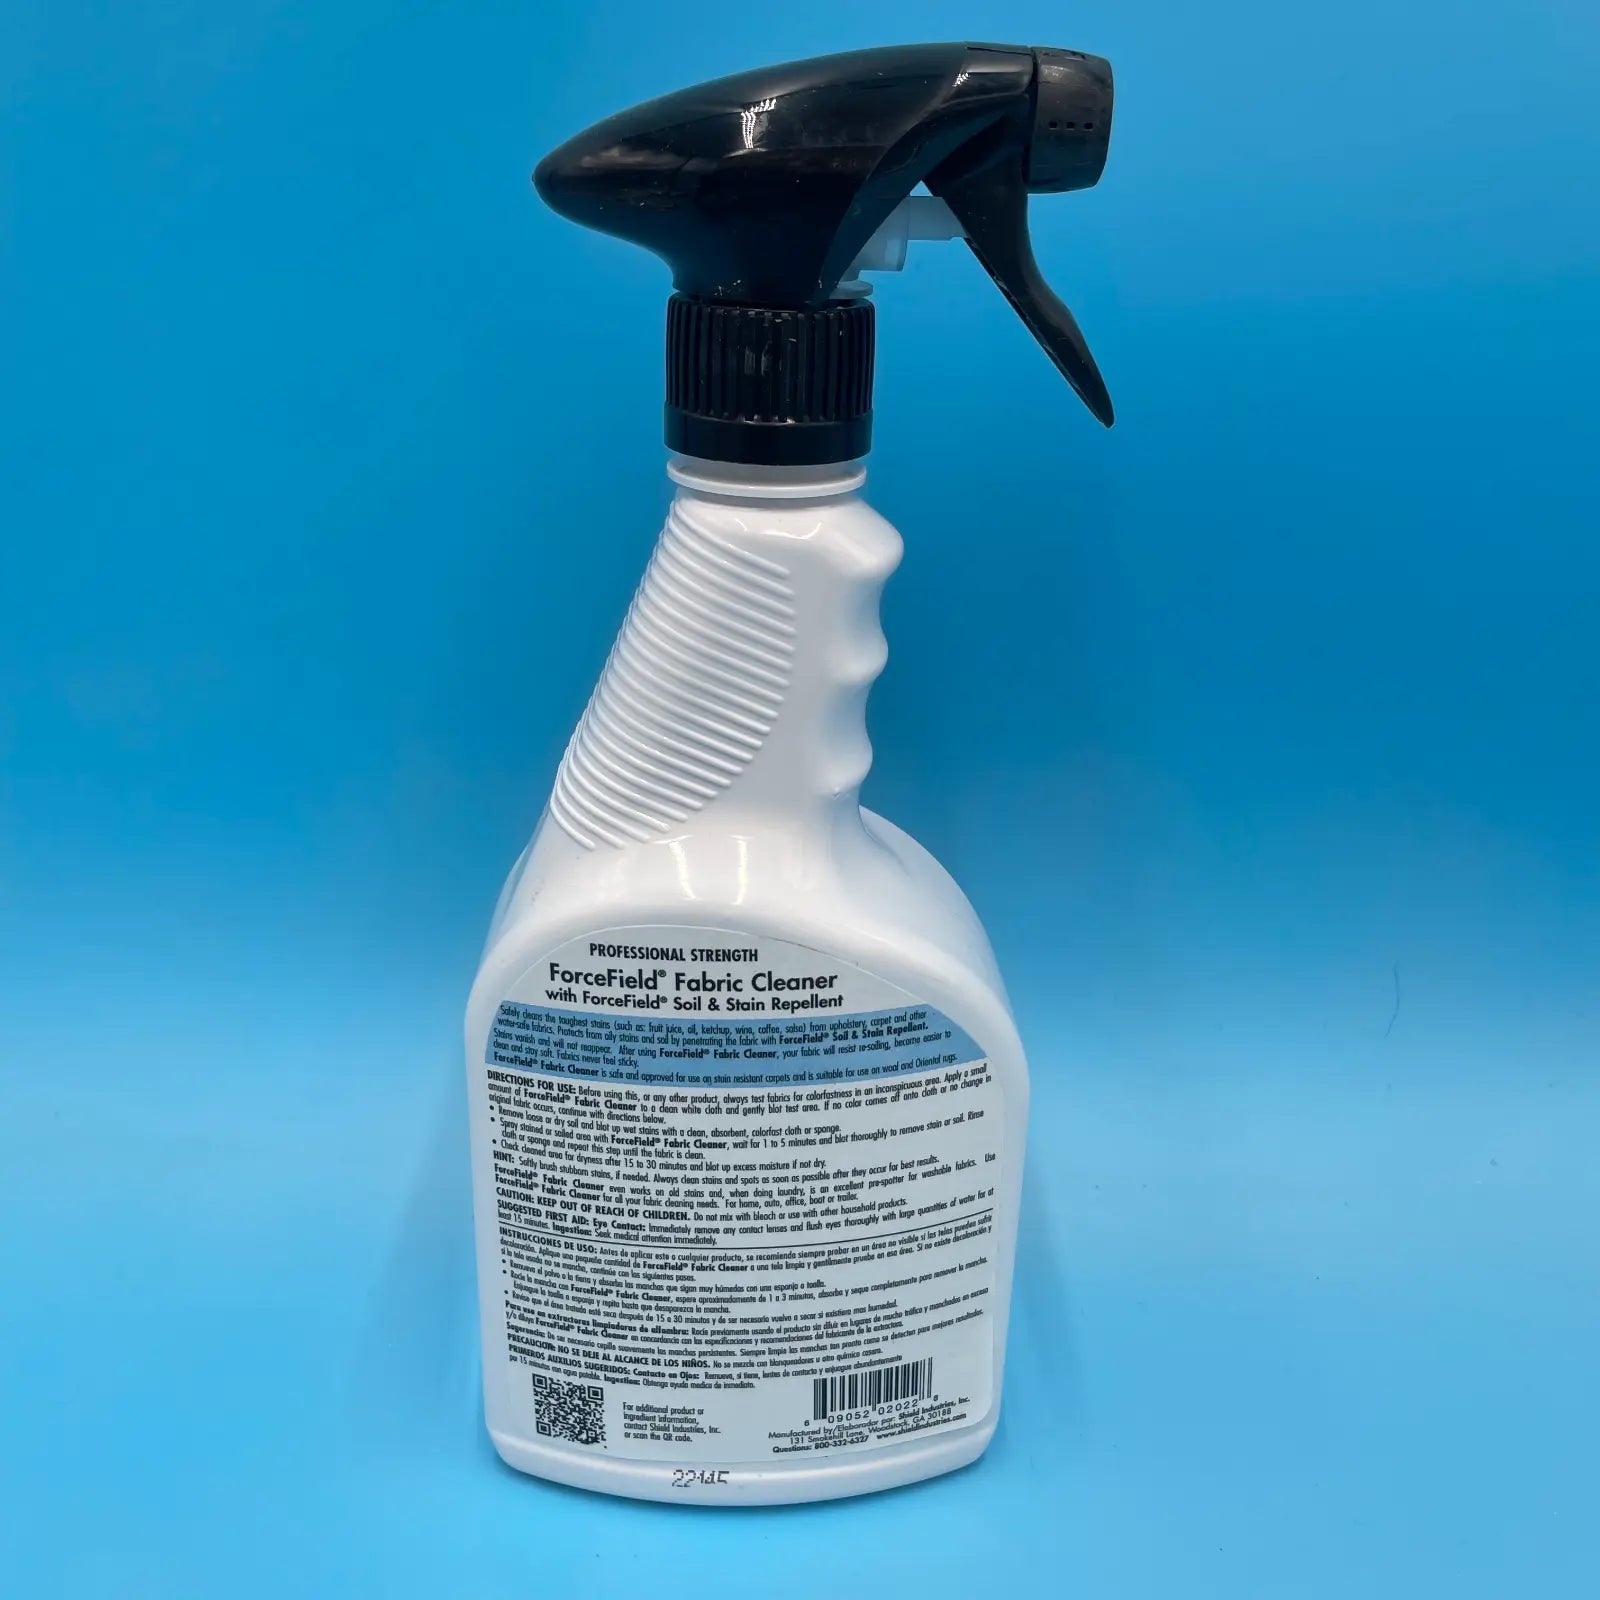 ForceField Professional Strength Fabric Cleaner